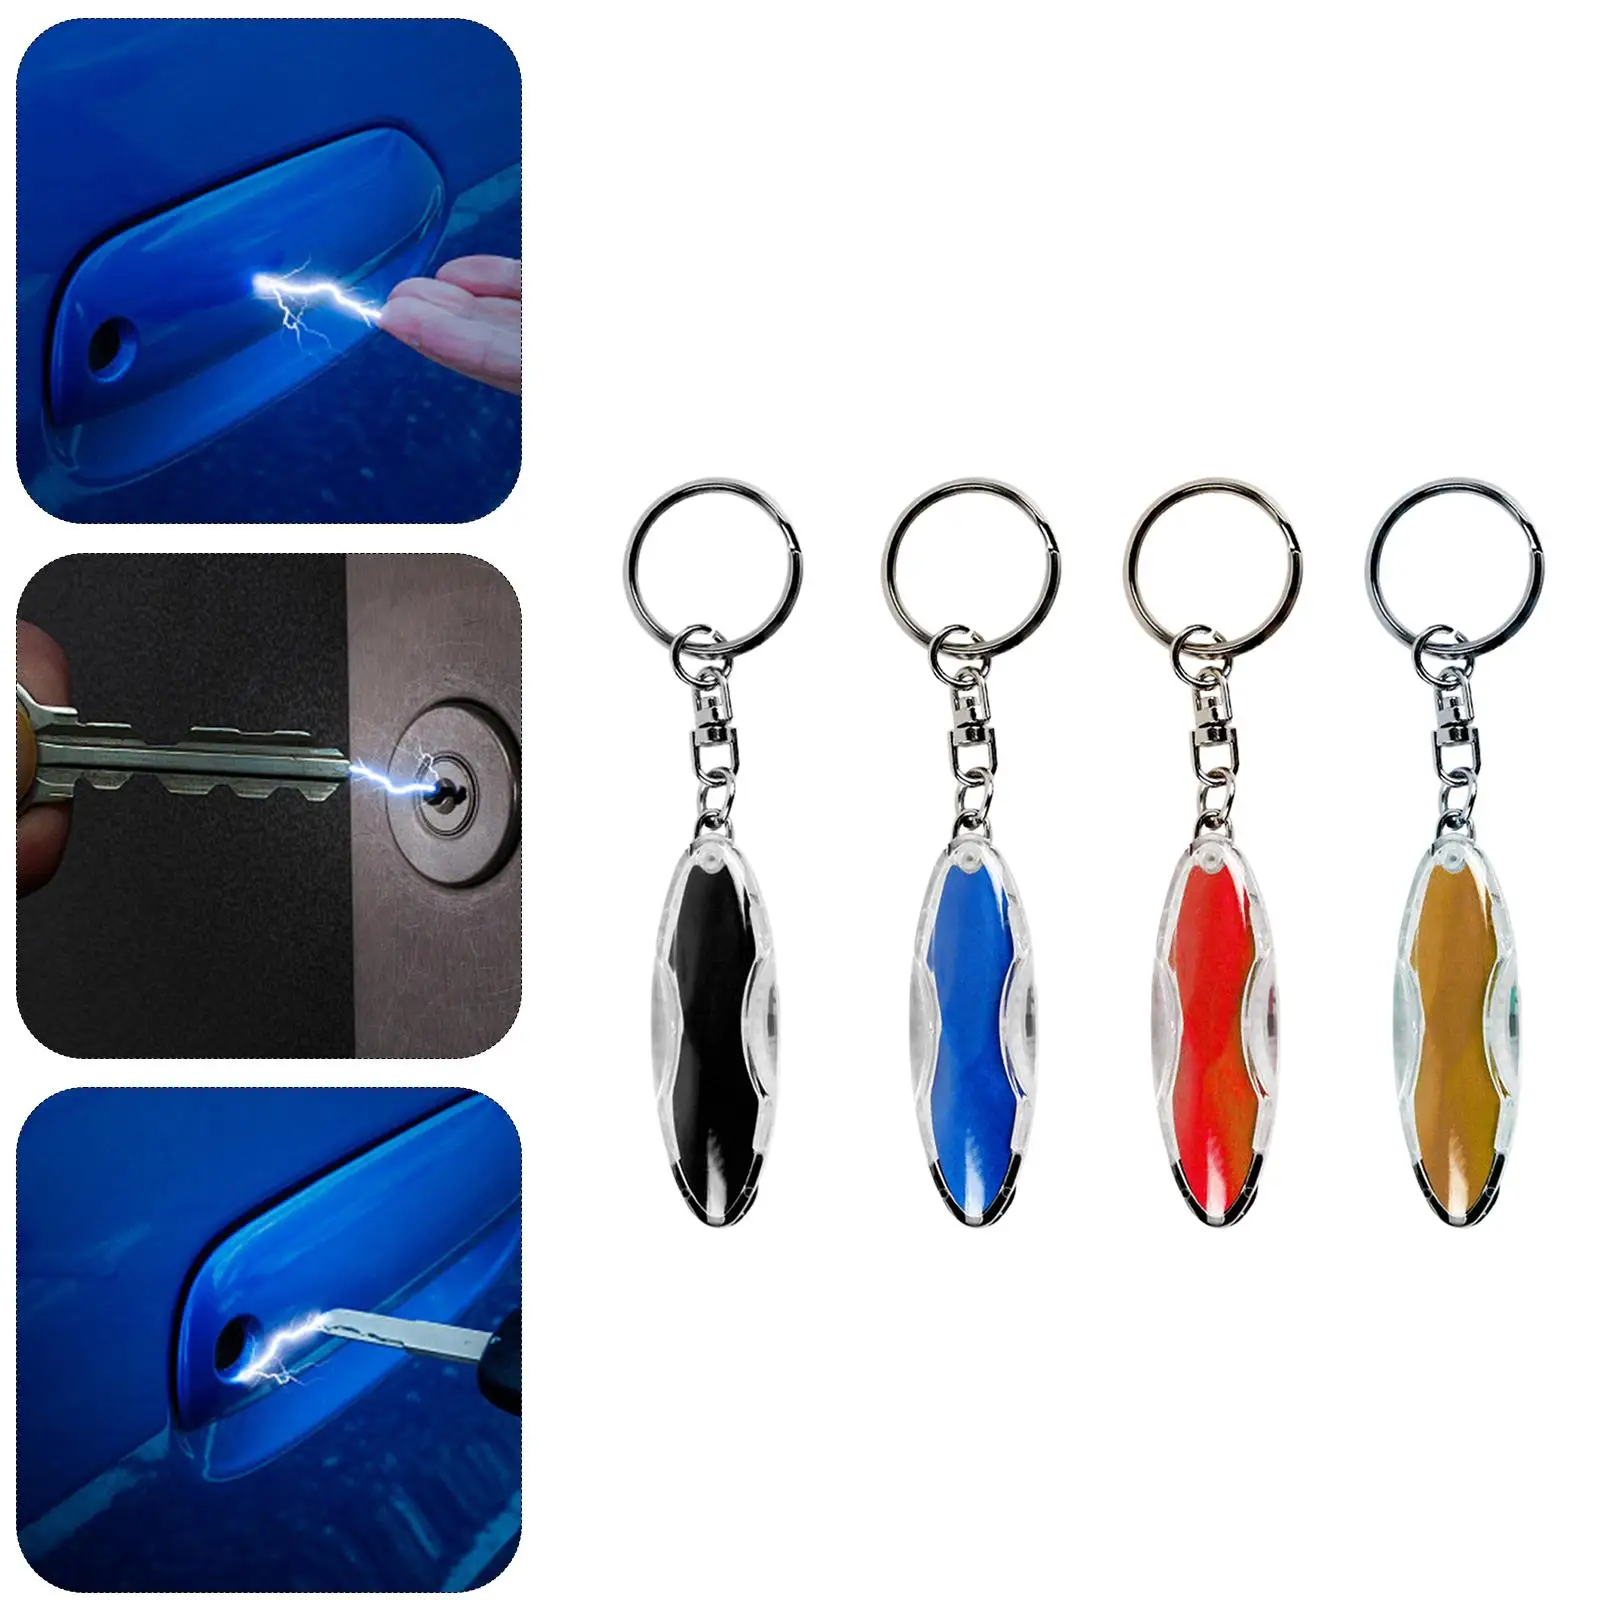 Portable Key Chain, Keyring Car Interior Accessories Gifts Practical Tools for